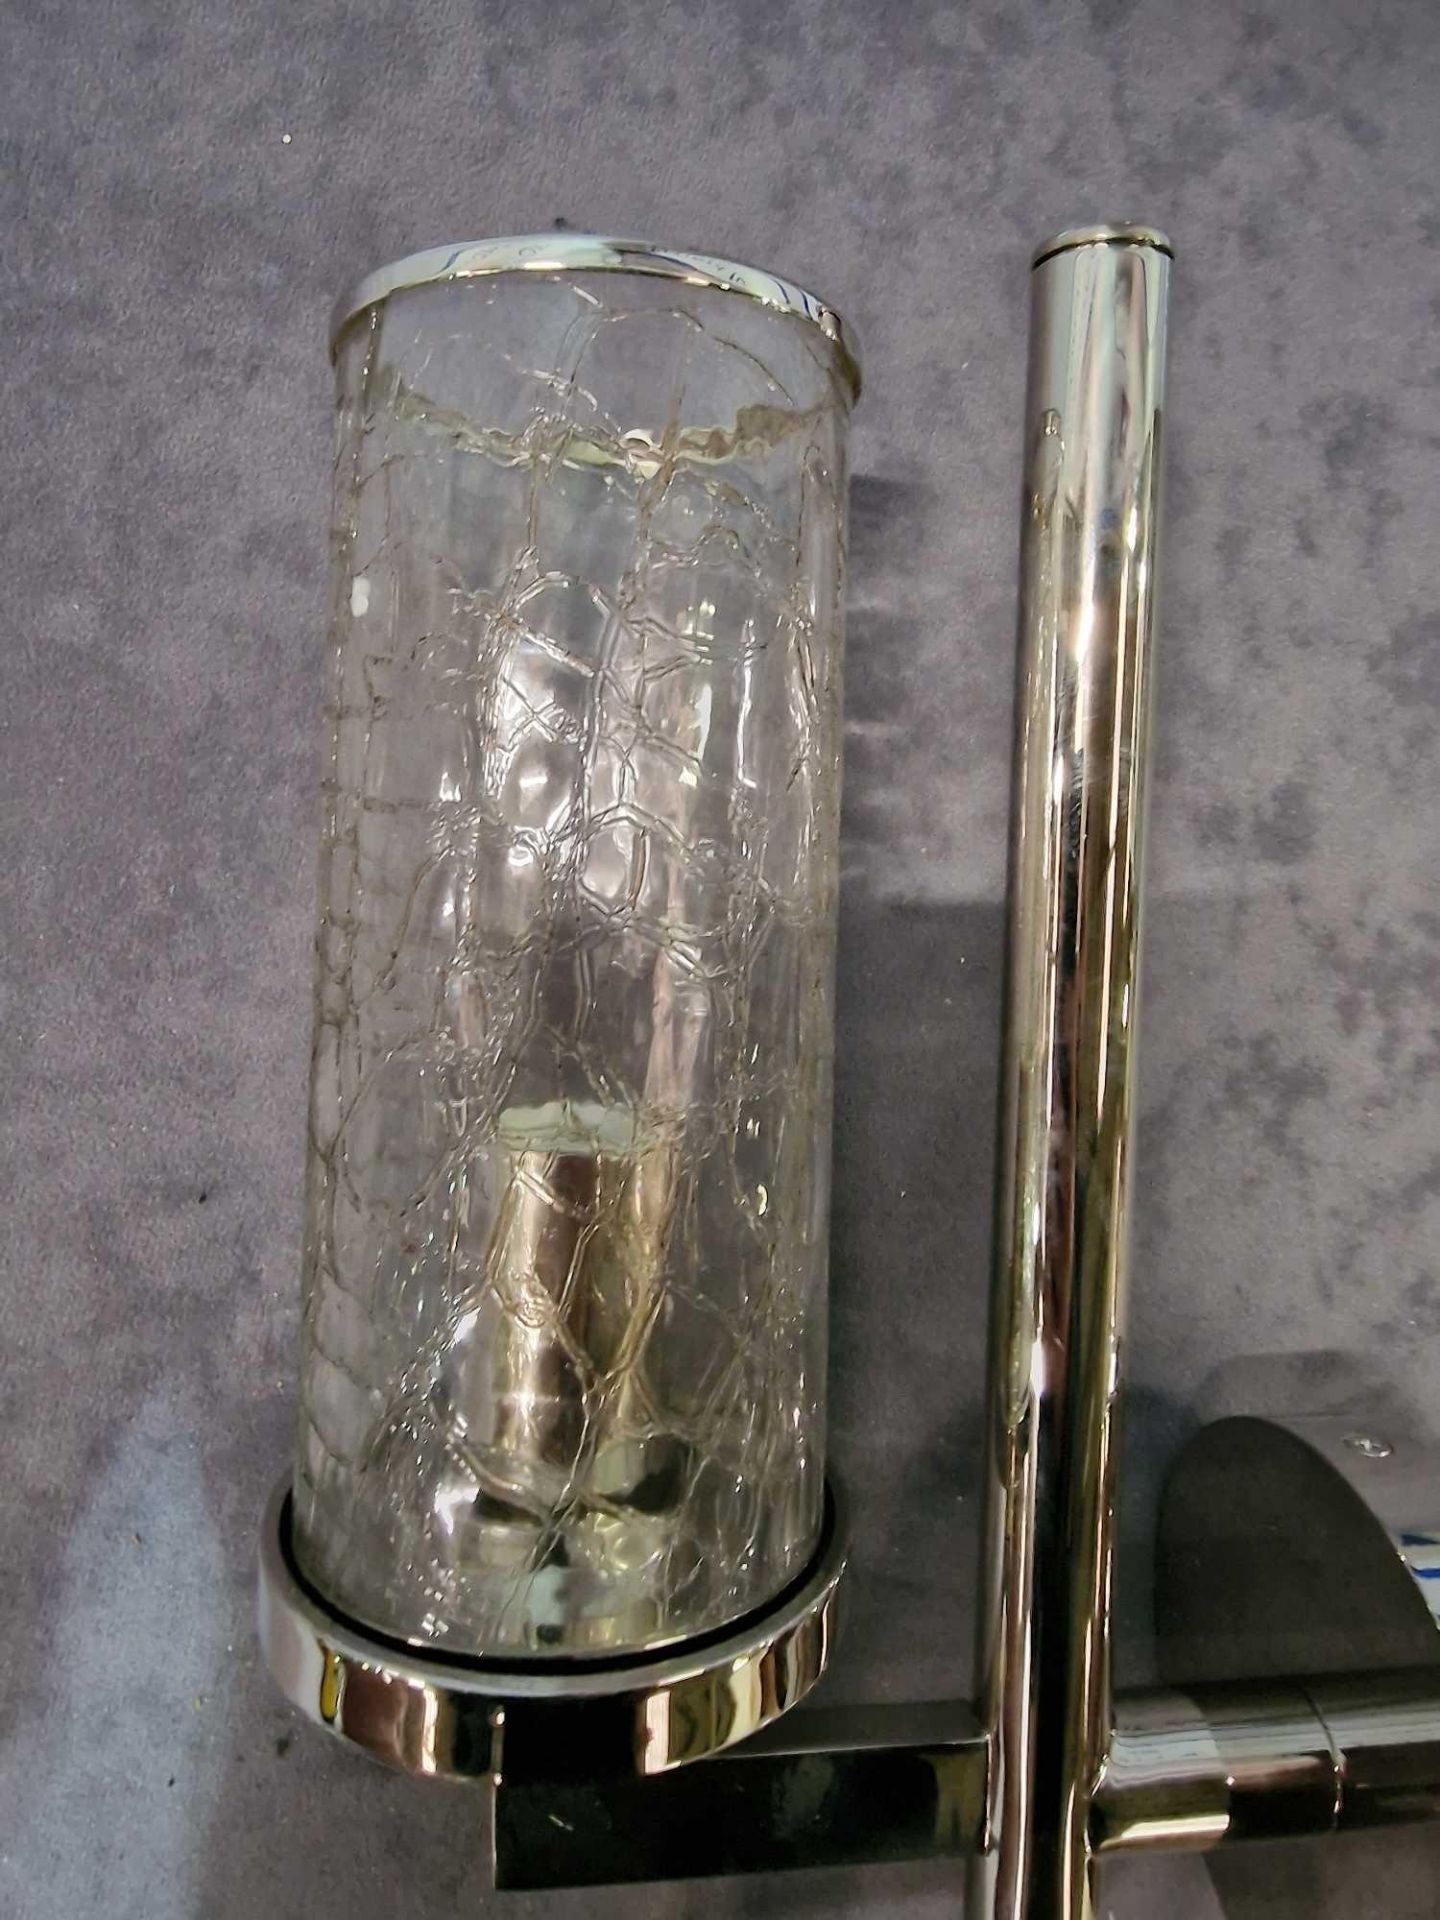 Kelly Wearstler For Visual Comfort Liaison Single Sconce In Polished Nickel With Crackle Glass Kelly - Image 2 of 2